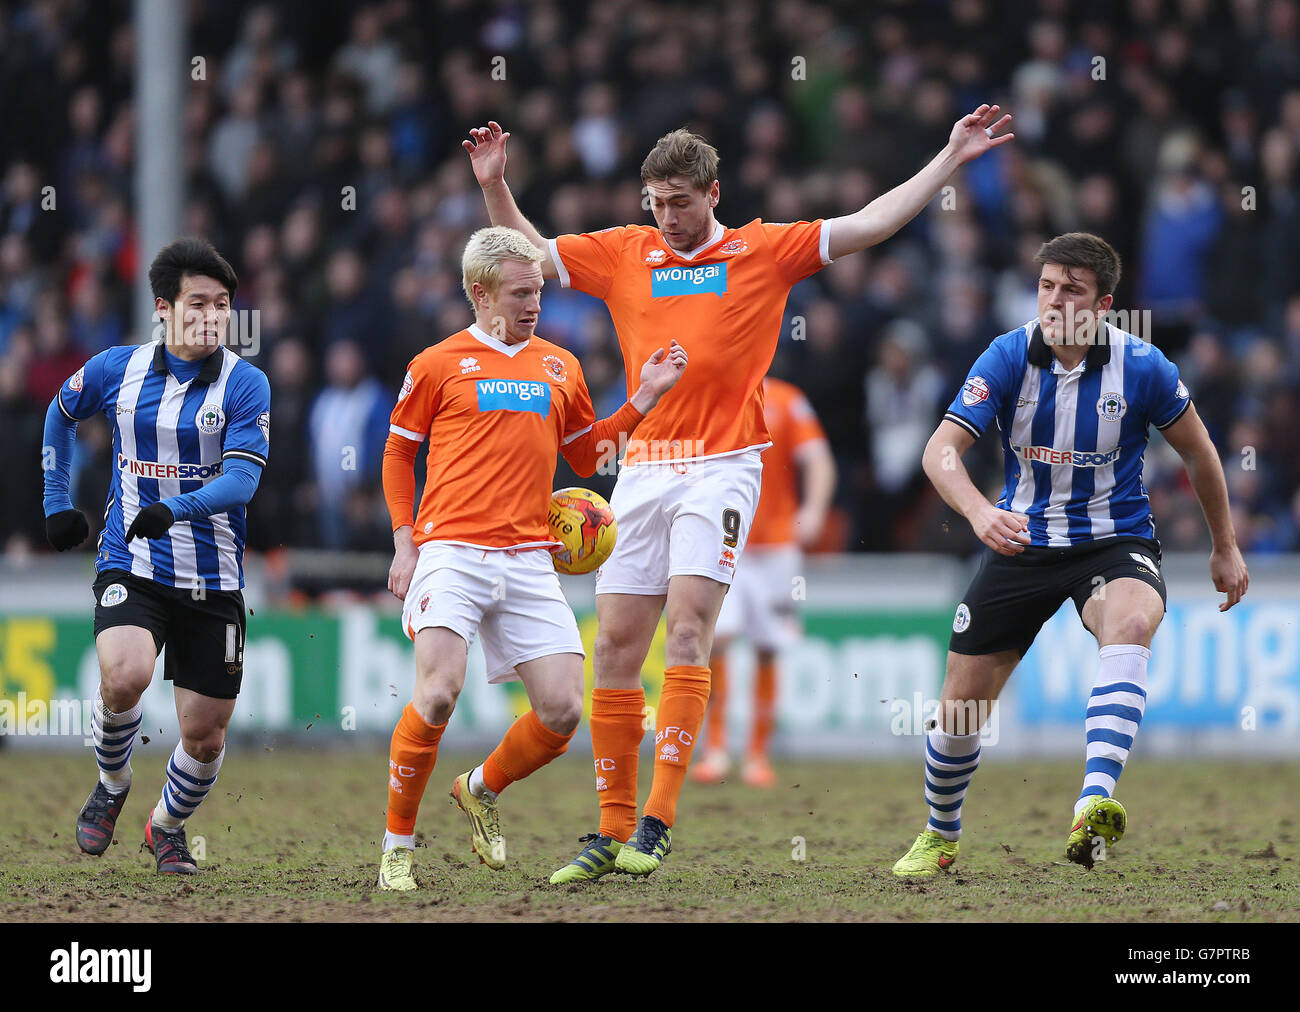 Soccer - Sky Bet Championship - Blackpool v Wigan Athletic - Bloomfield Road. Blackpool's David Perkins and Steven Davies battle with Wigan Athletic's Kim Bo Kyung and Harry Maguire Stock Photo